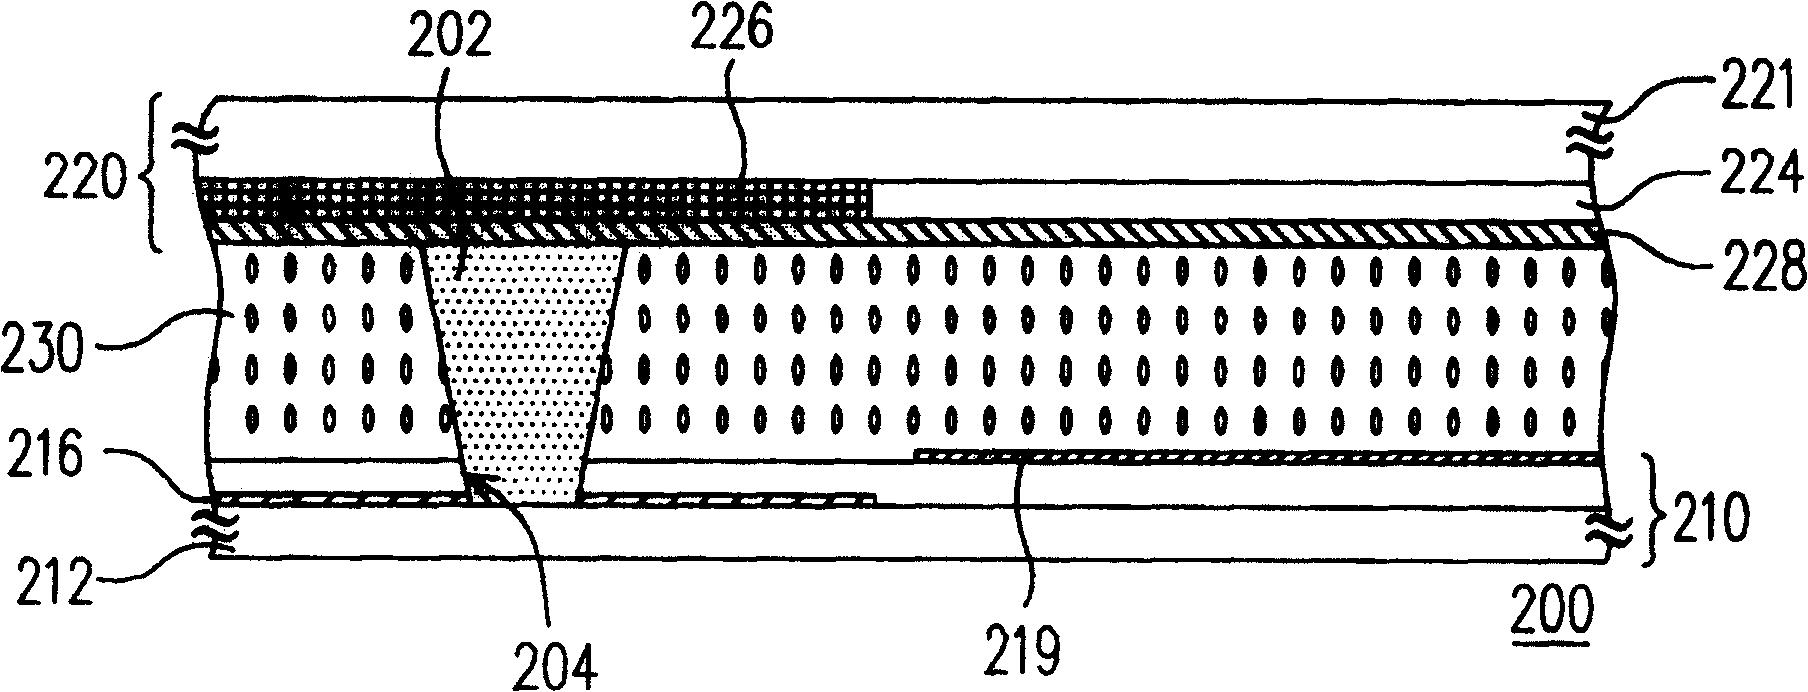 Liquid-crystal display panel and its production